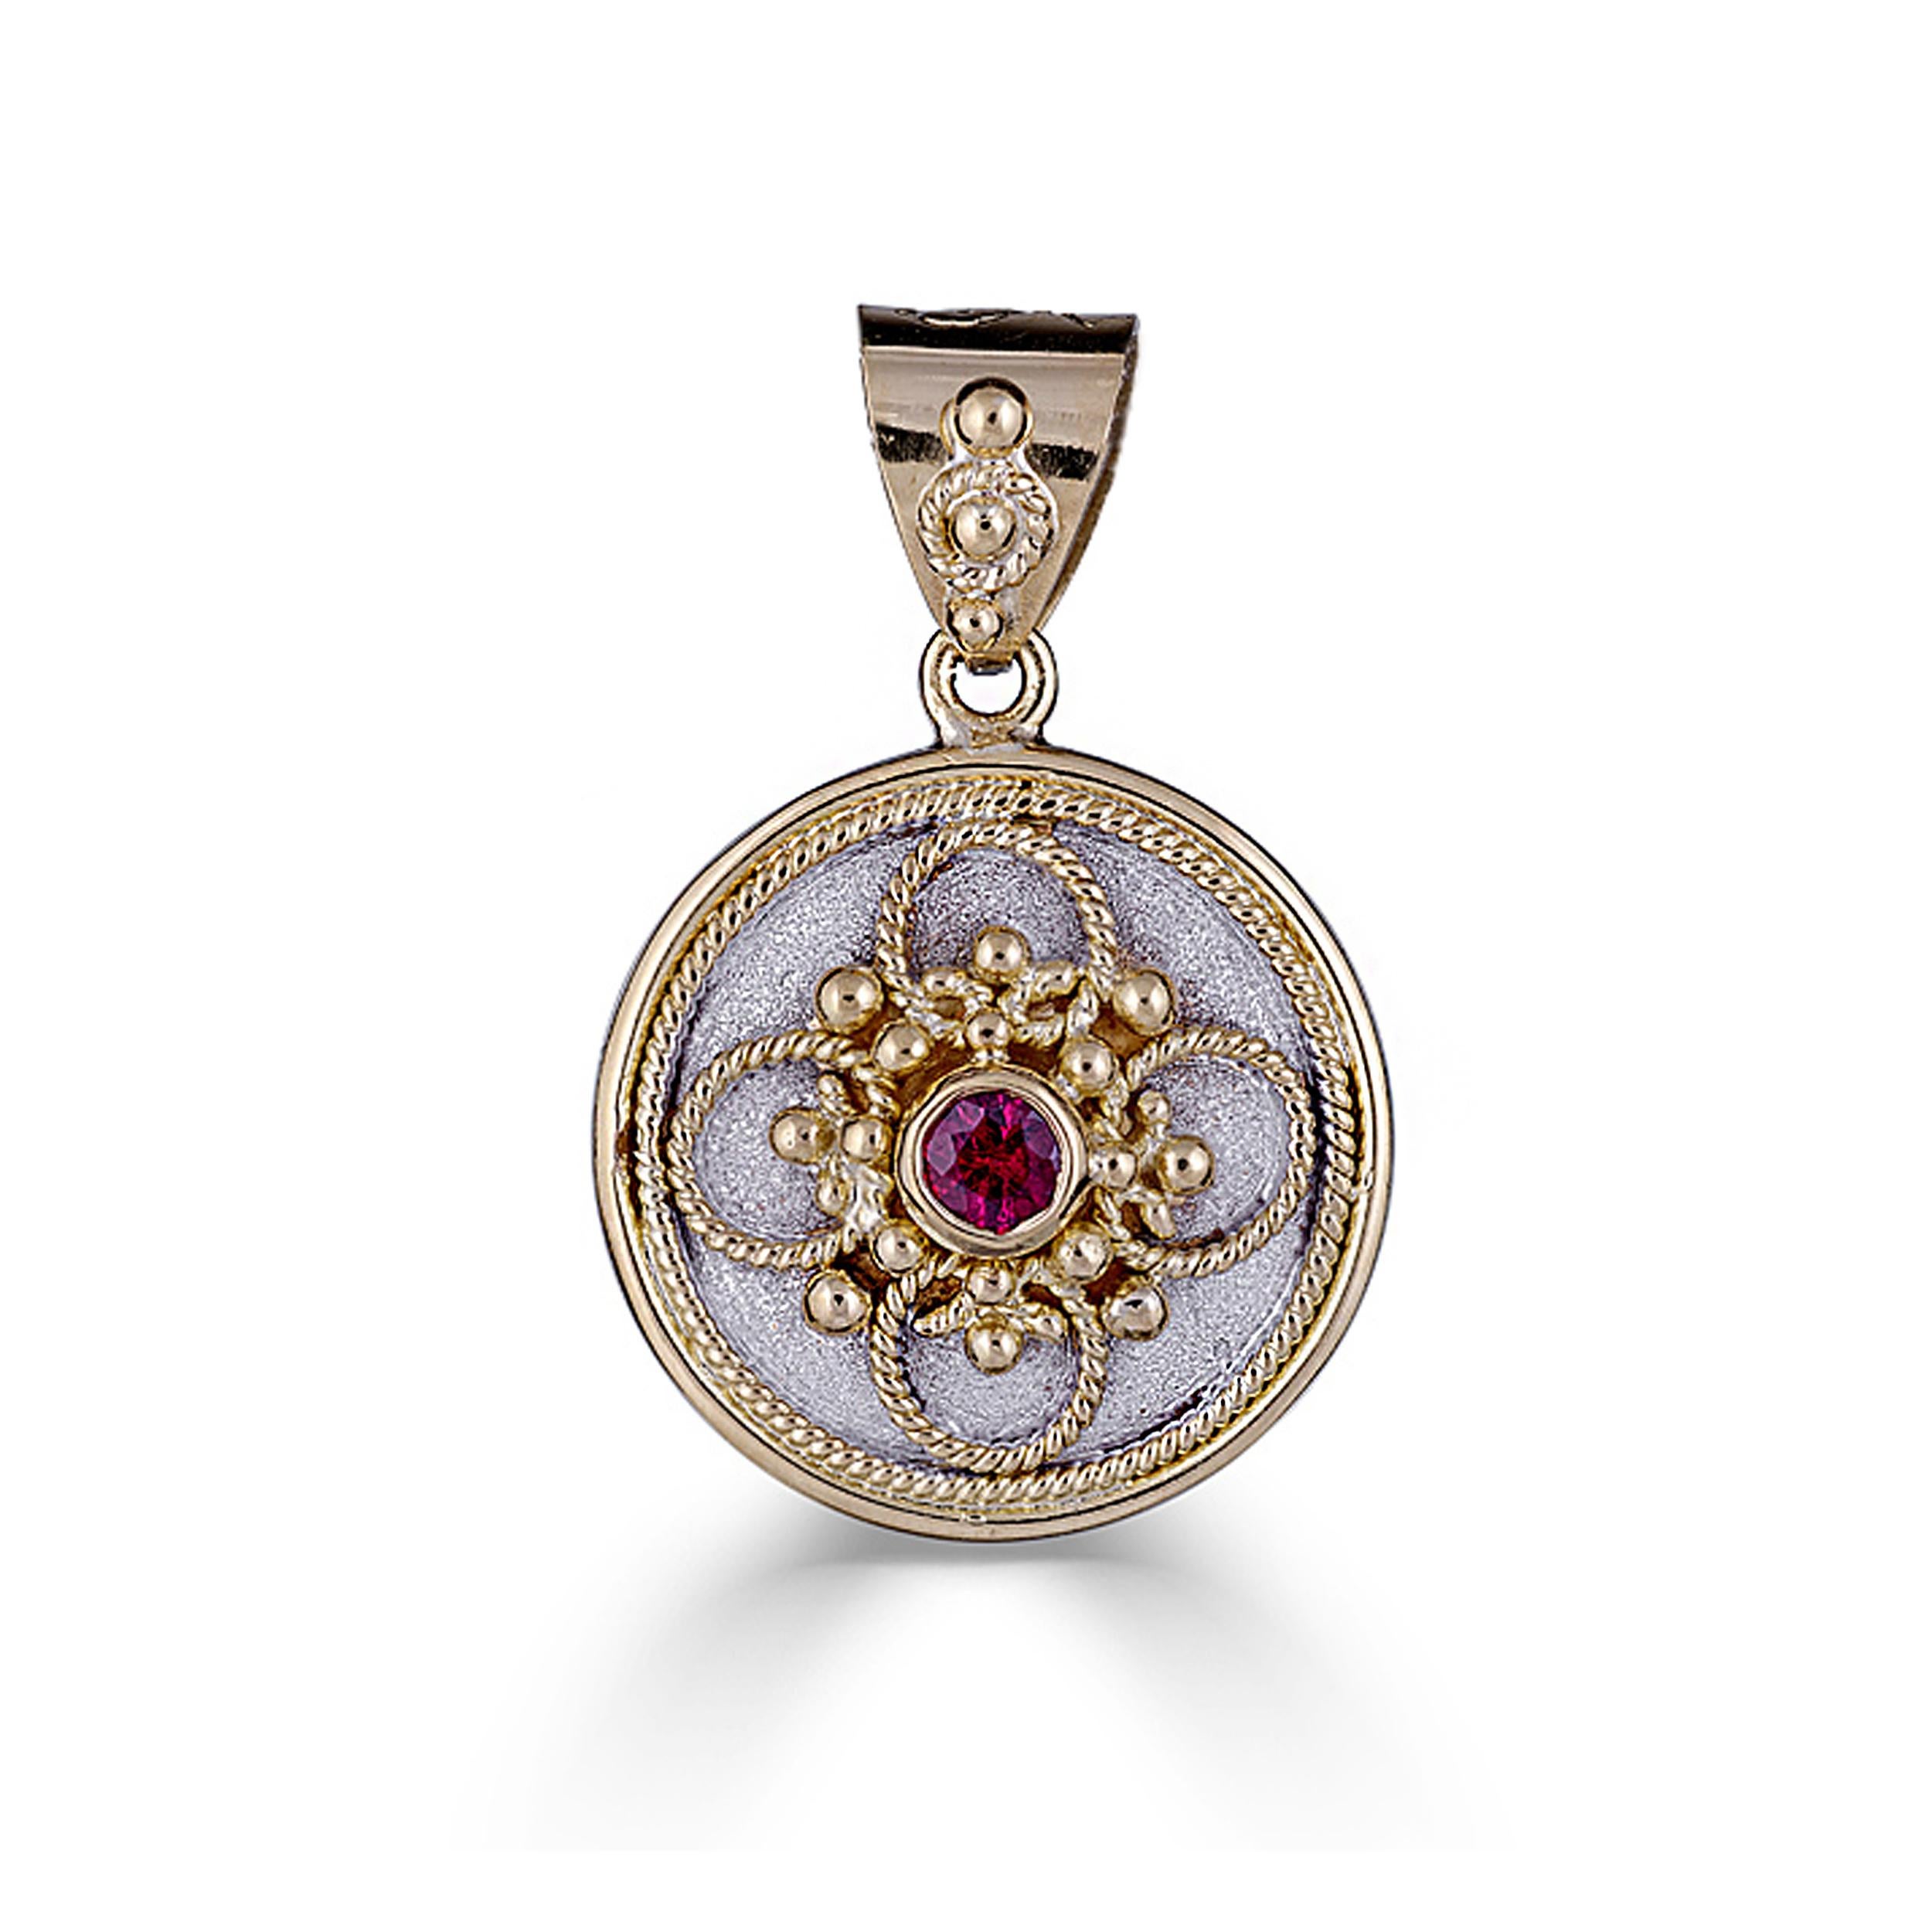 S.Georgios designer pendant all handmade solid 18 Karat Yellow Gold. This pendant is microscopically decorated - and has granulation work all the way around with gold beads and wires shaped like the last letter of the Greek Alphabet - Omega, which